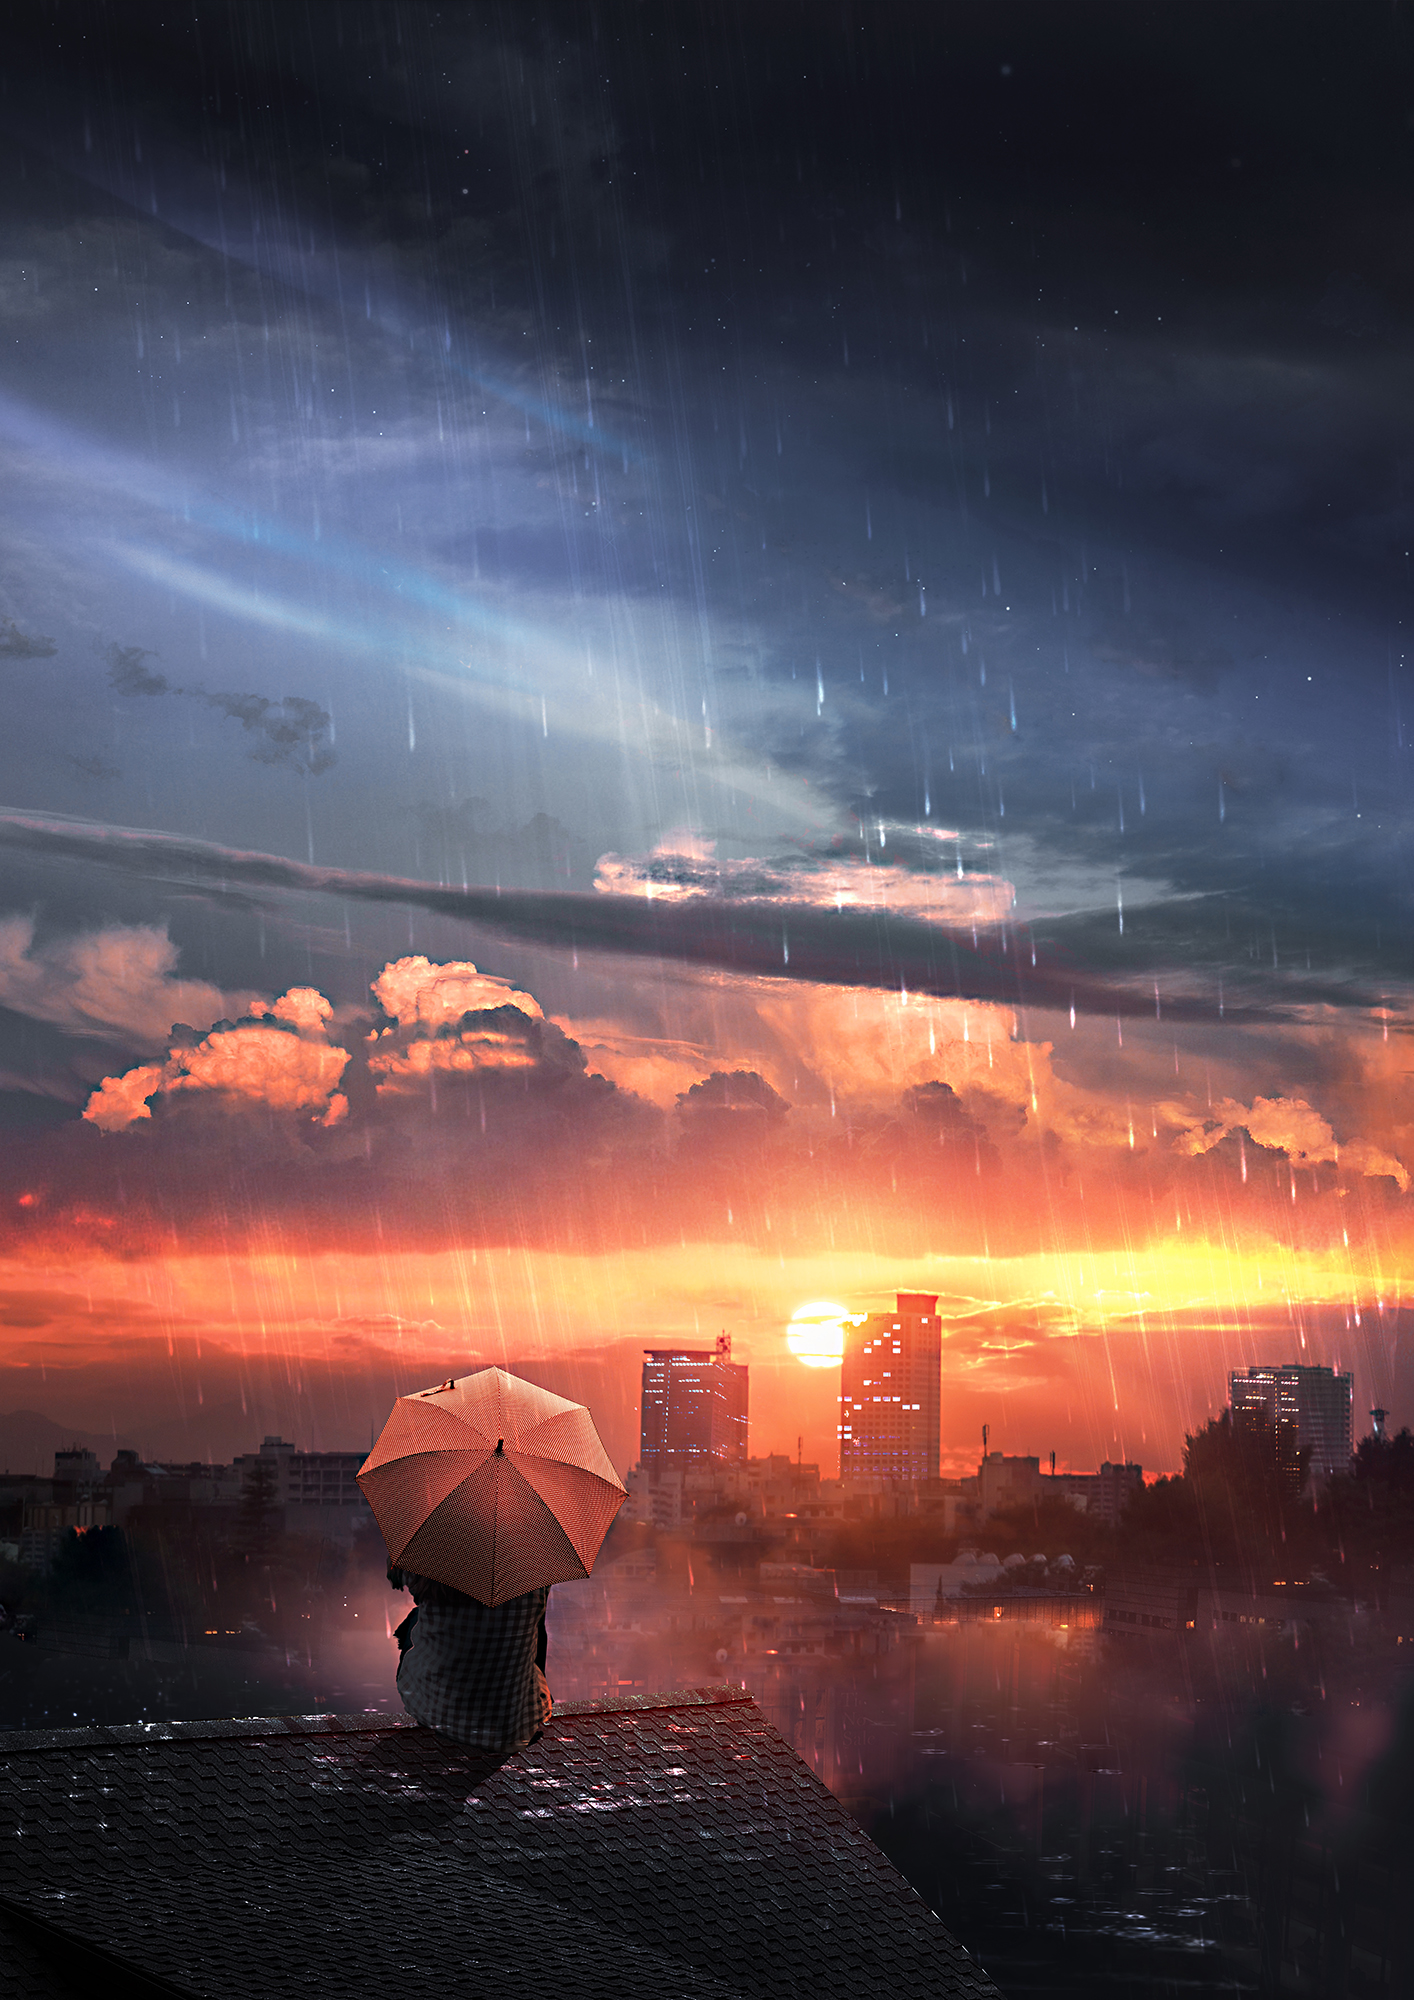 rain, loneliness, art, privacy, night, roof, seclusion, sky, umbrella lock screen backgrounds